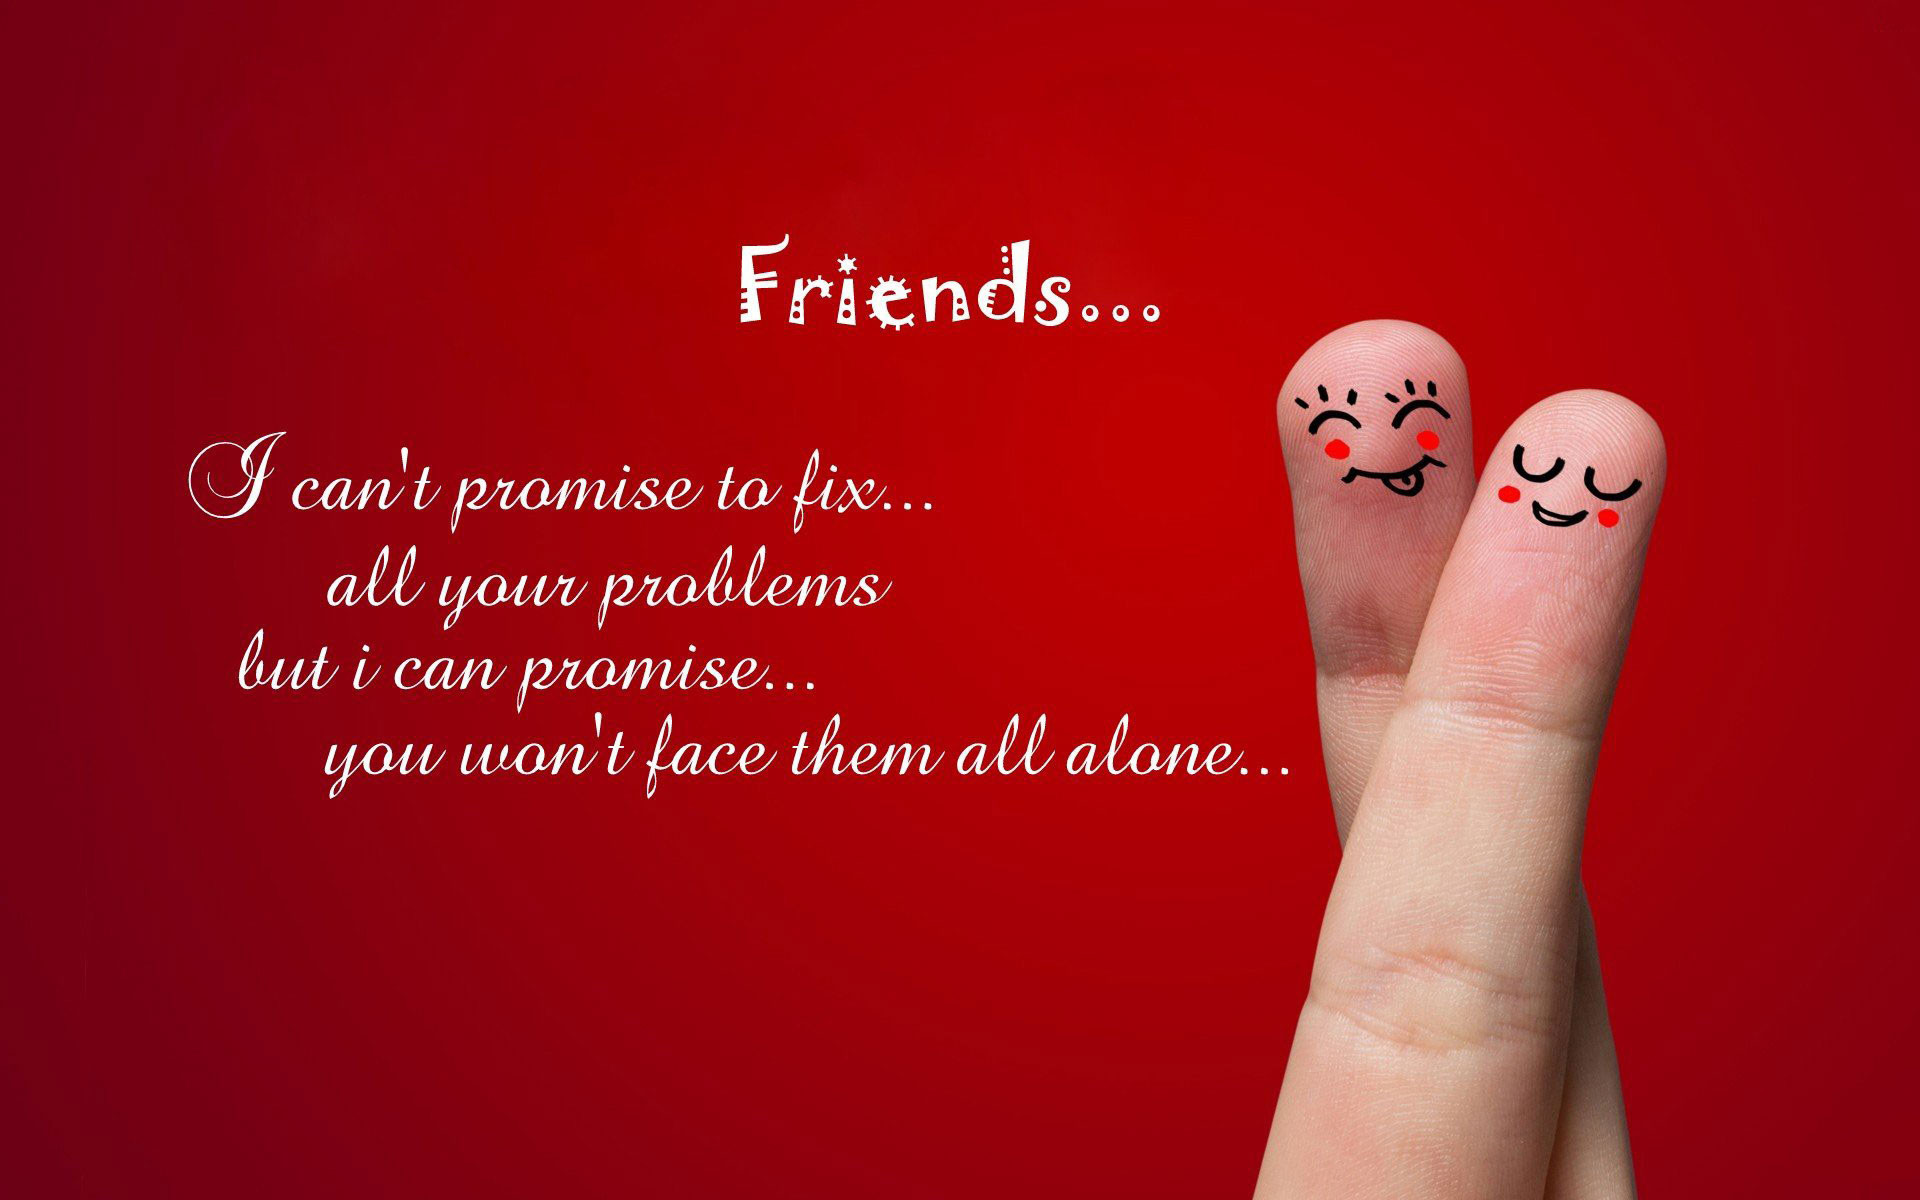 Friendship Quotes Wallpapers
 40 Cute Friendship Quotes With